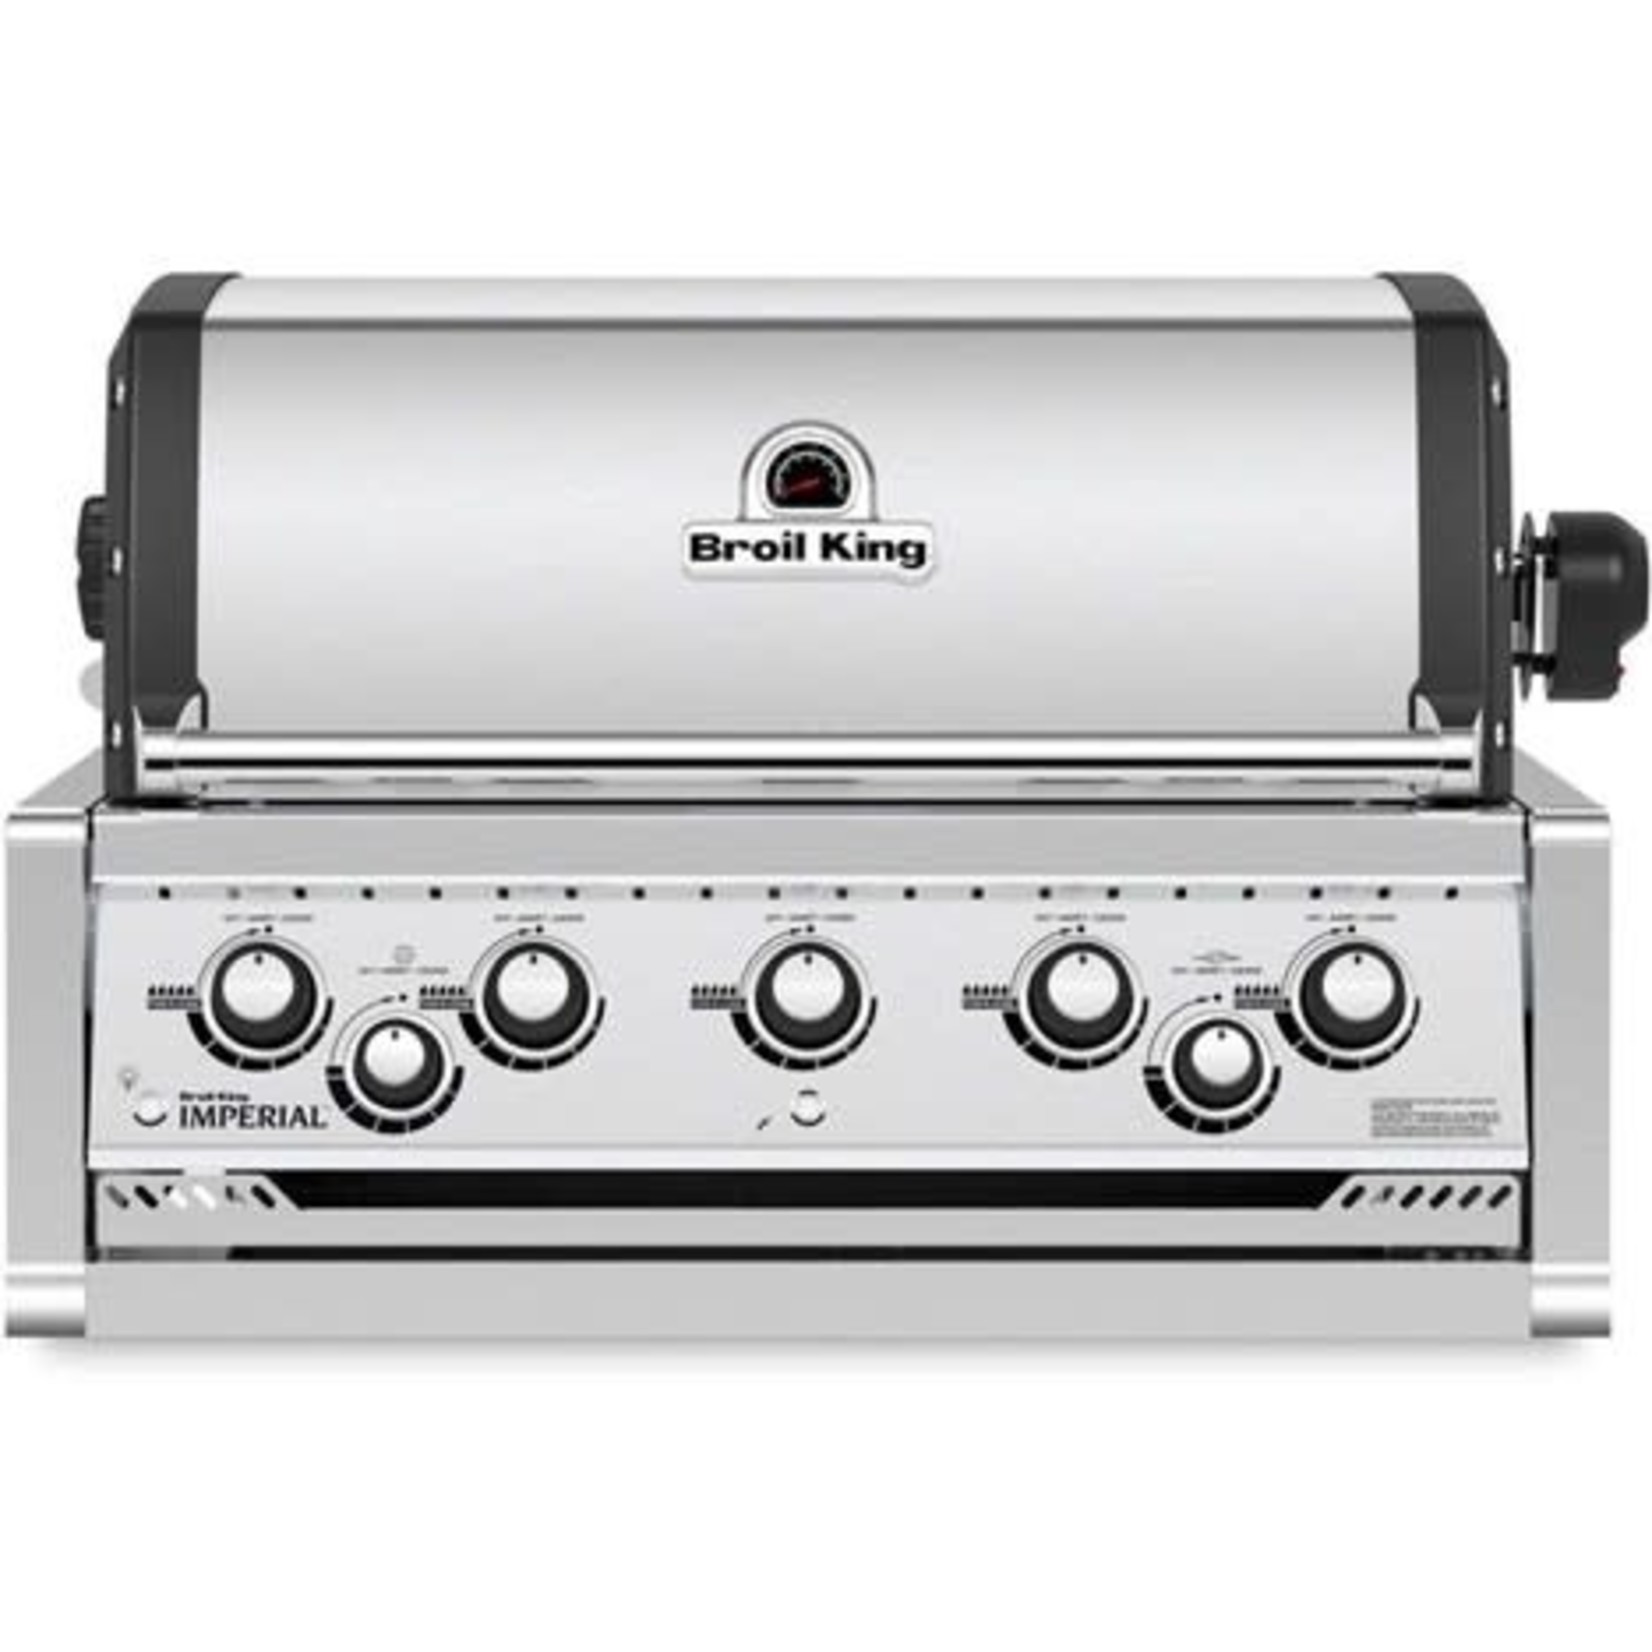 Broil King S590 Imperial - Built in Grill Head